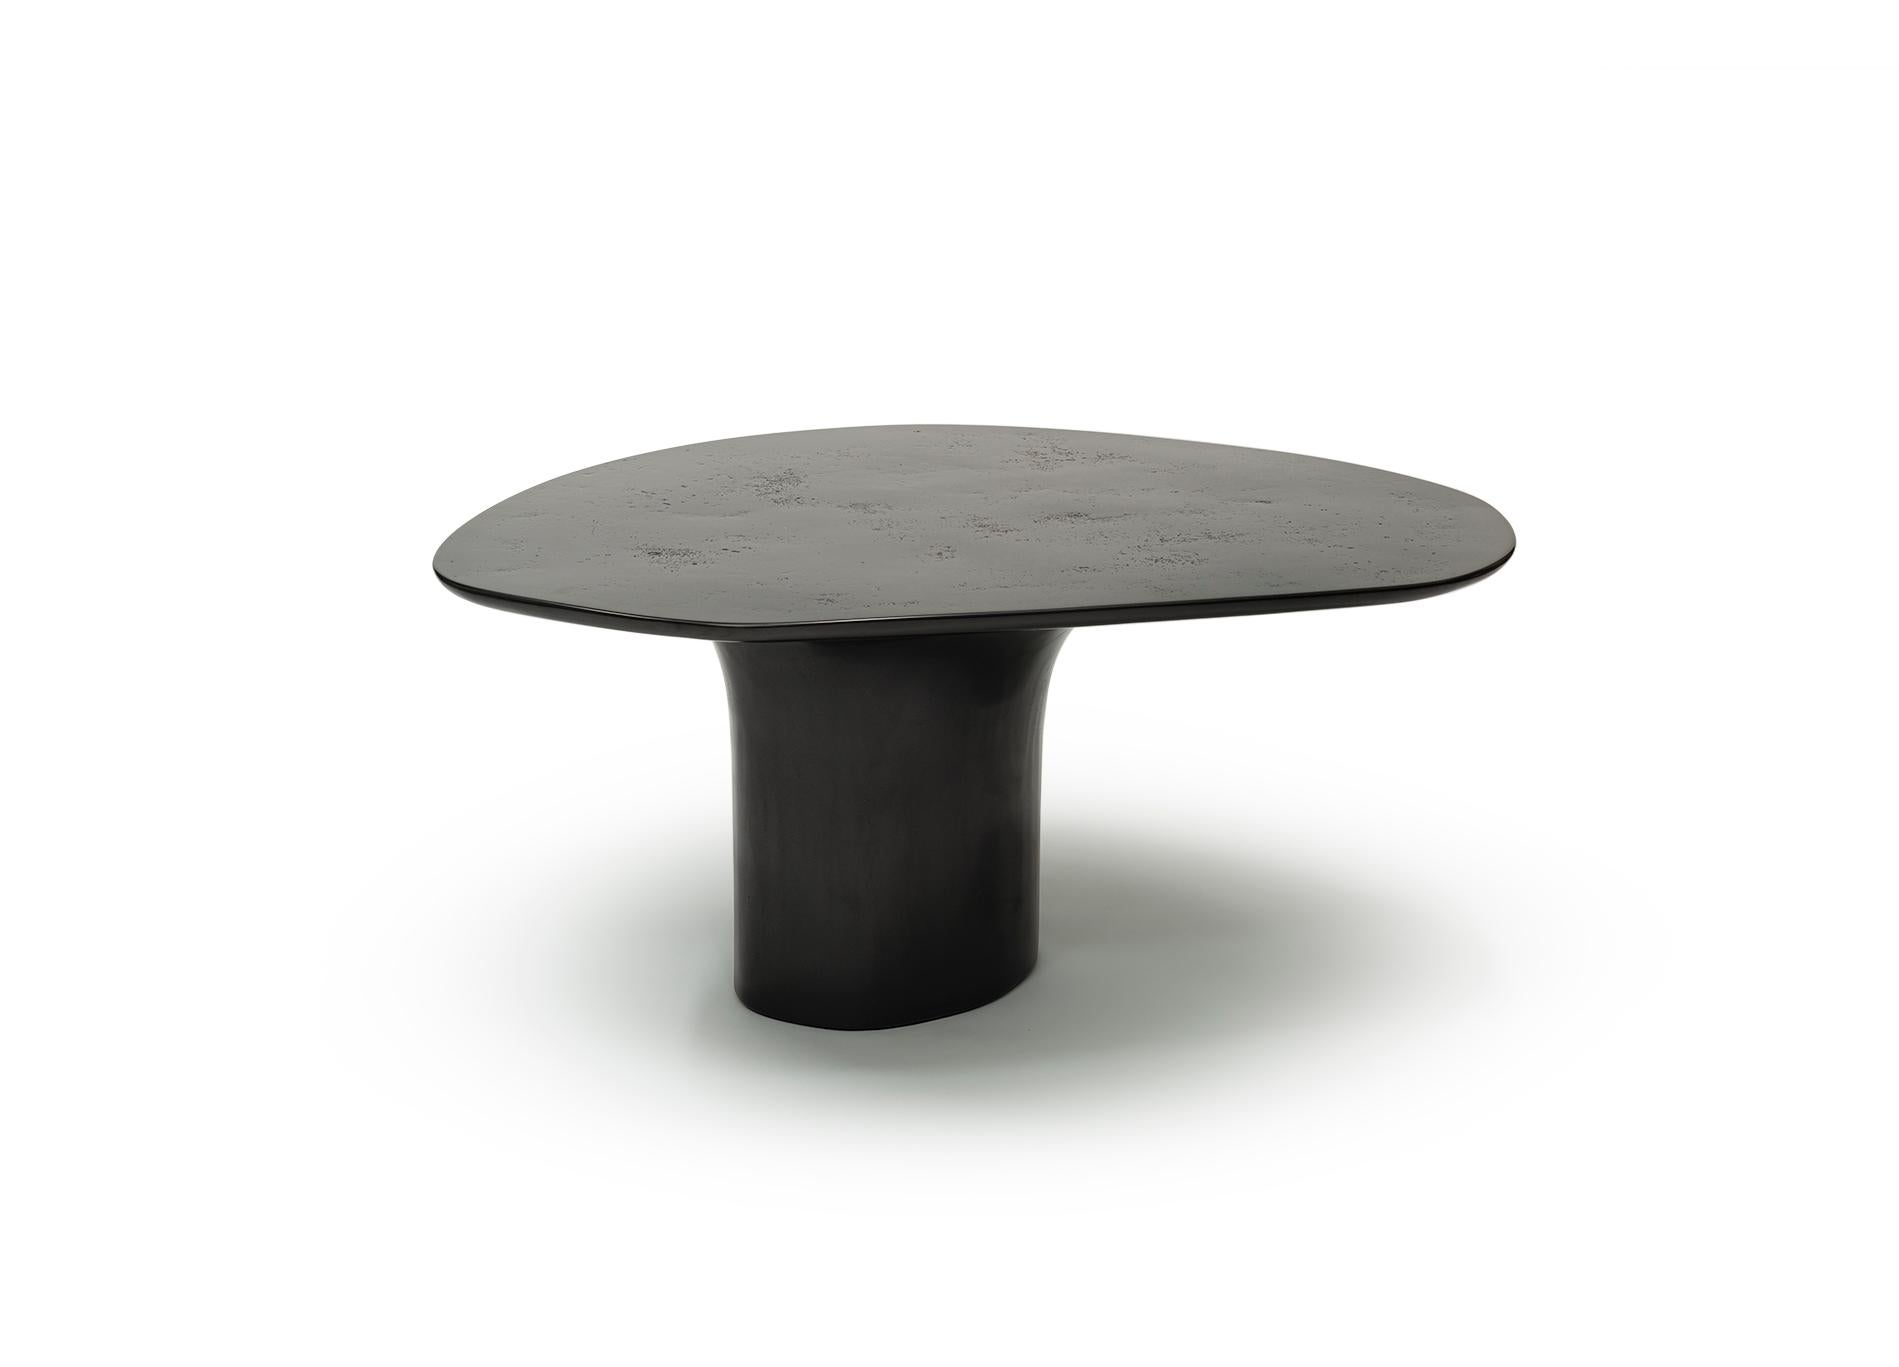 NR black smooth Pinin, 21st century contemporary sculptured circular black low table

The highly edge intuitively shaped low table possess the touch of lack of gravity. The table top and base constitution convey the impression being a